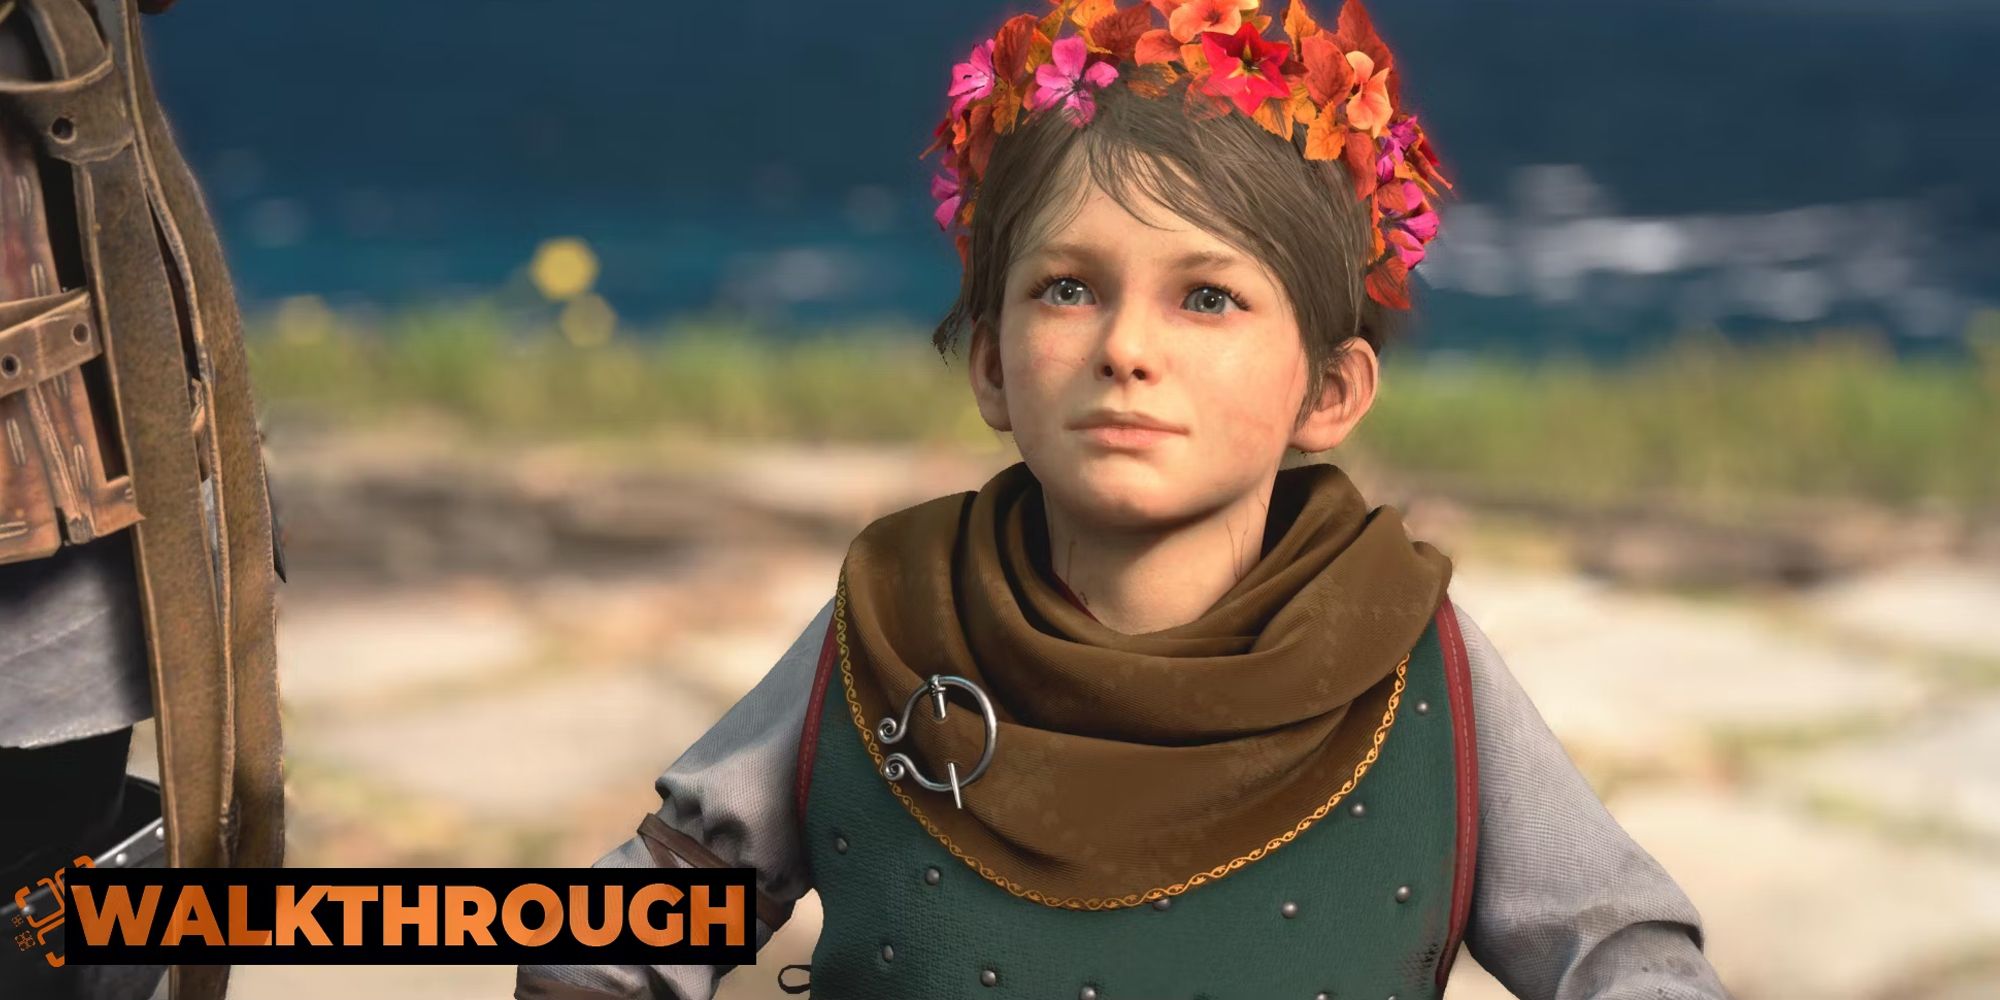 How To Complete A Sea Of Promises In A Plague Tale: Requiem